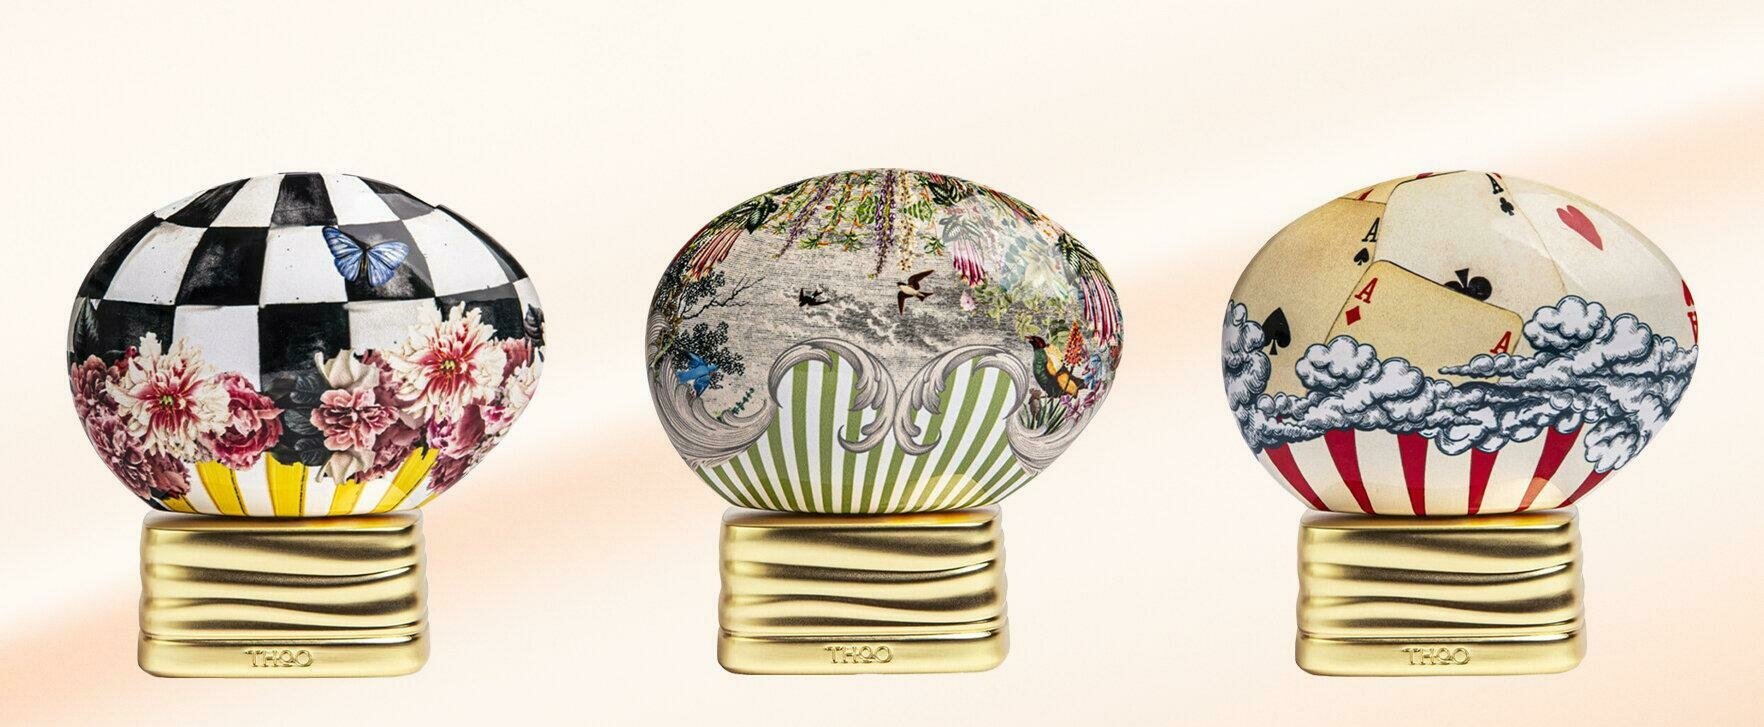 "Sparkling and Eccentric": The New "Crazy" Collection From the House of Oud